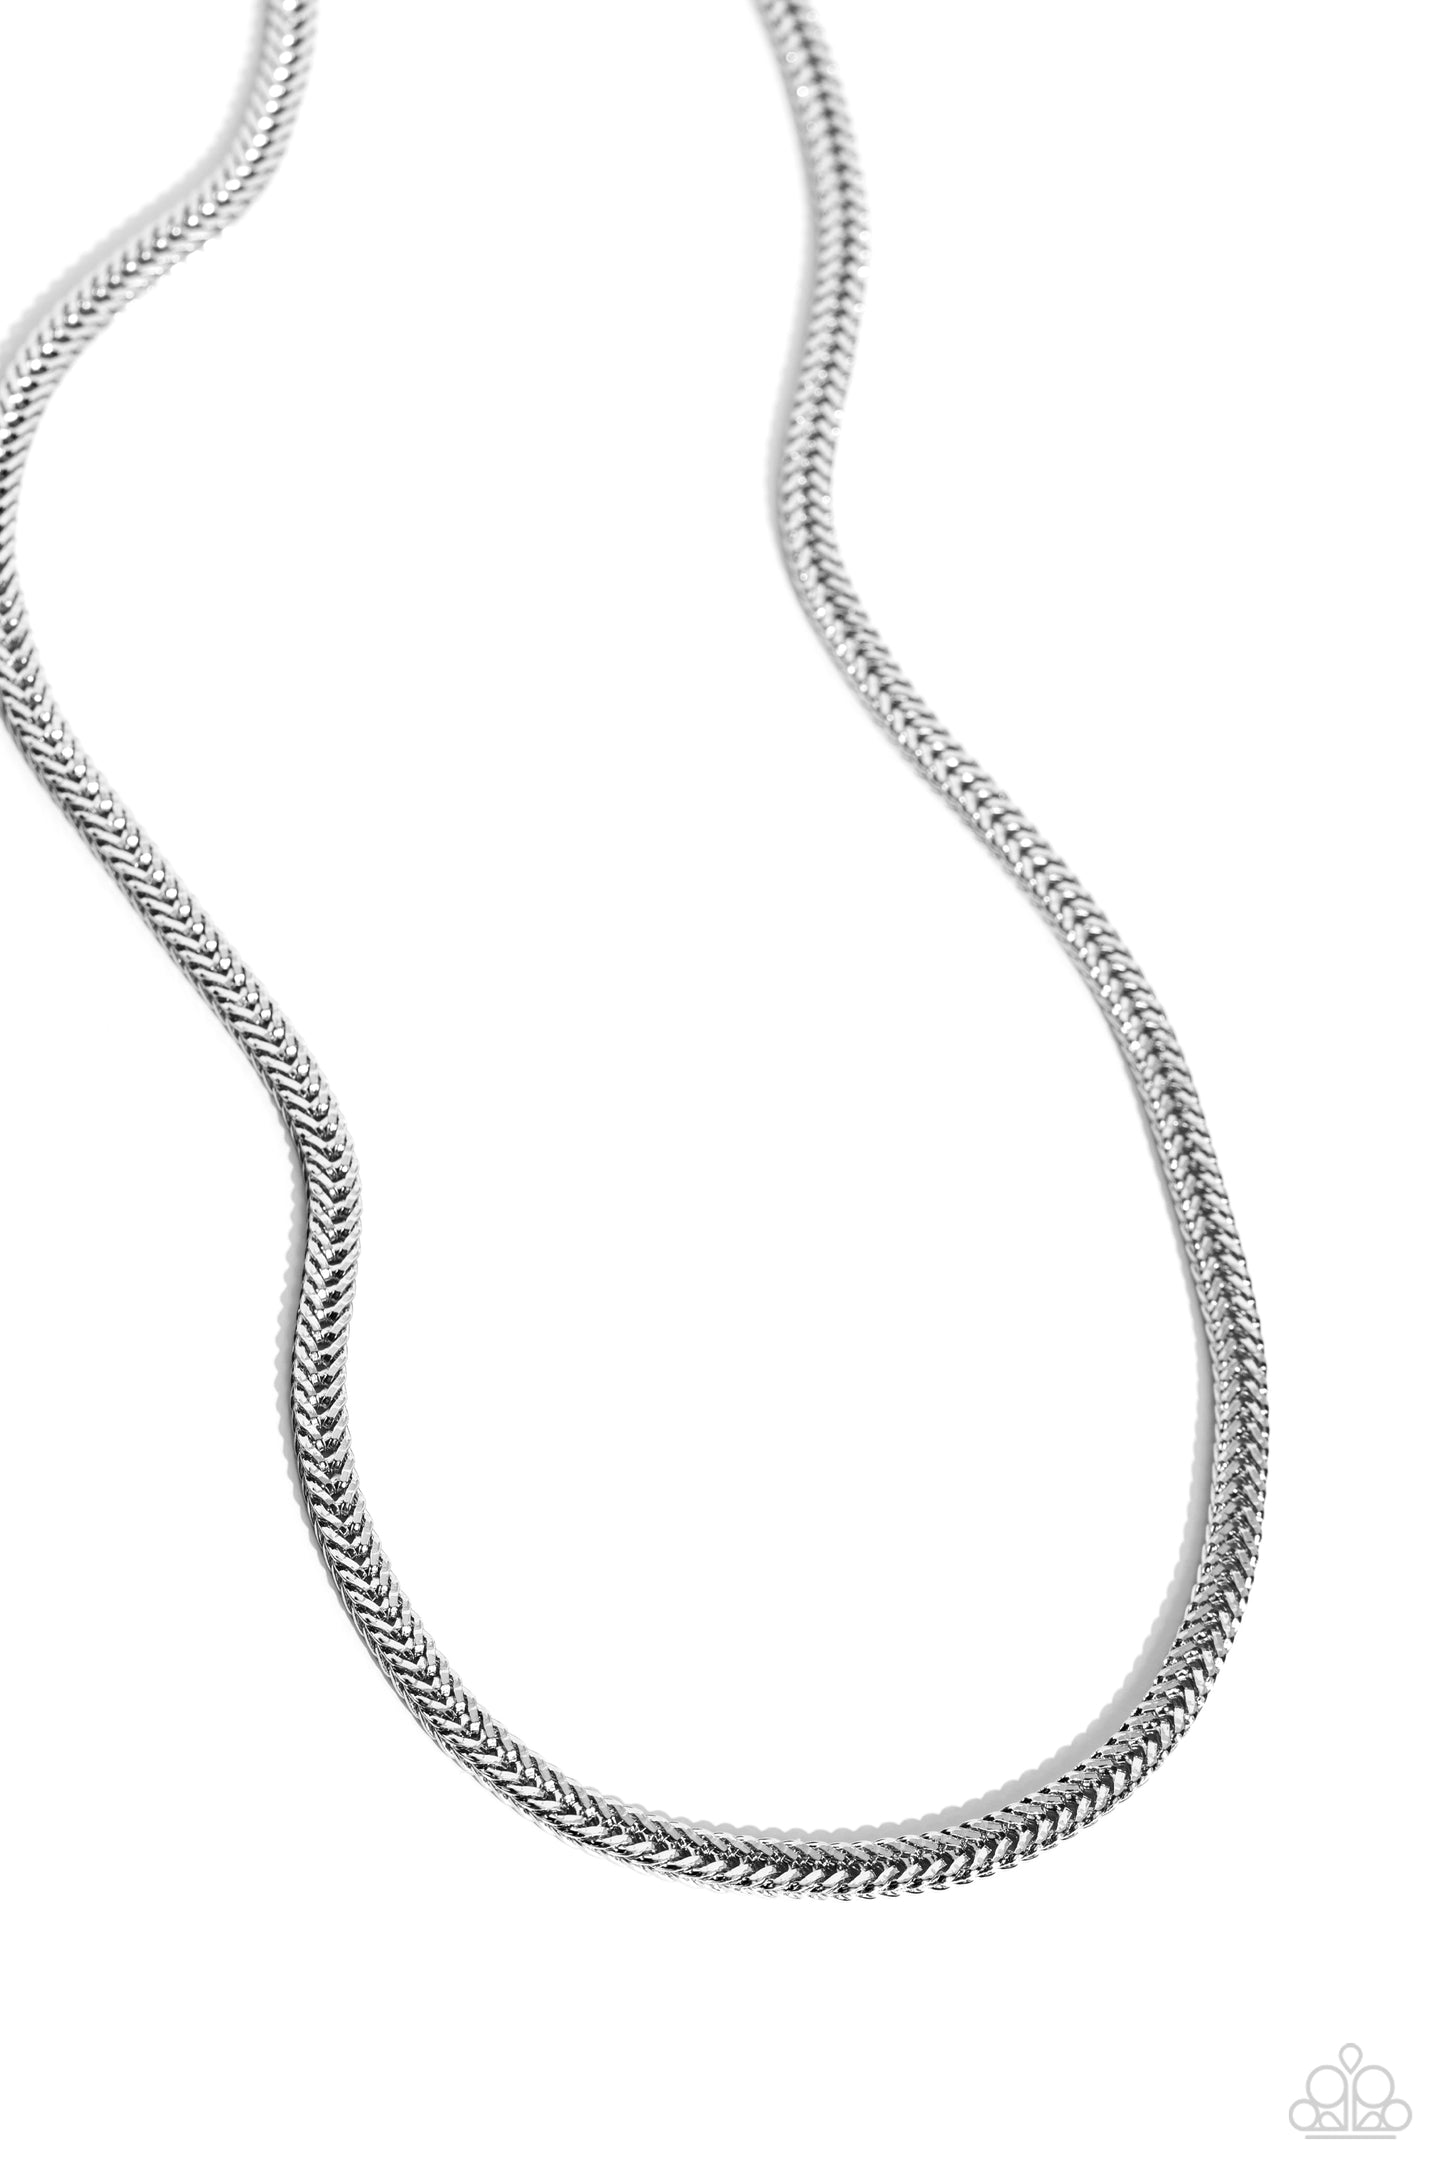 <p>Rows of angular silver links stack and interlock into a bold 3-dimensional chain, resulting in an intense statement piece across the chest. Features an adjustable clasp closure.</p> <p><i> Sold as one individual necklace. </i></p> <br><b> Get The Complete Look! </b> <br>Bracelet: "City Crusader - Silver" (Sold Separately)